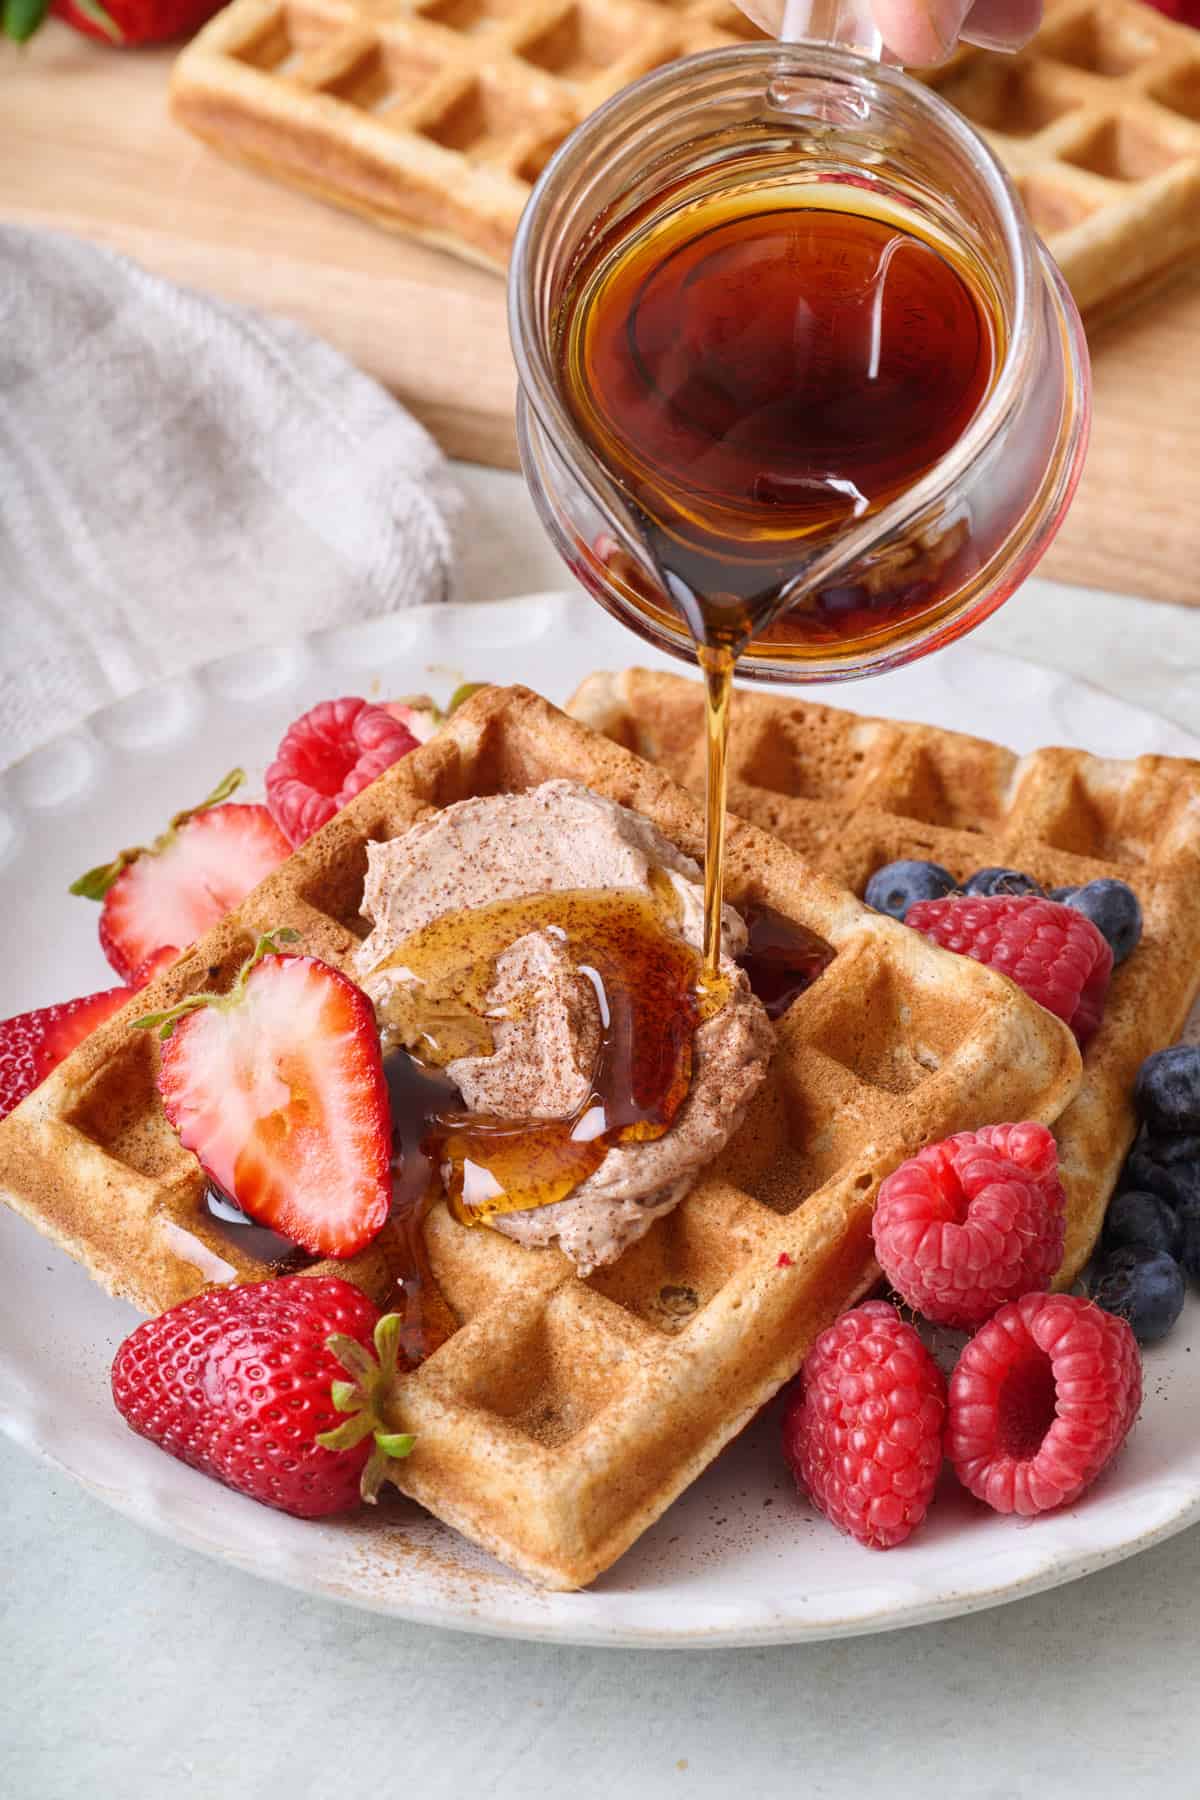 Maple syrup being poured over a serving of cinnamon waffles with whipped butter and fresh fruit.